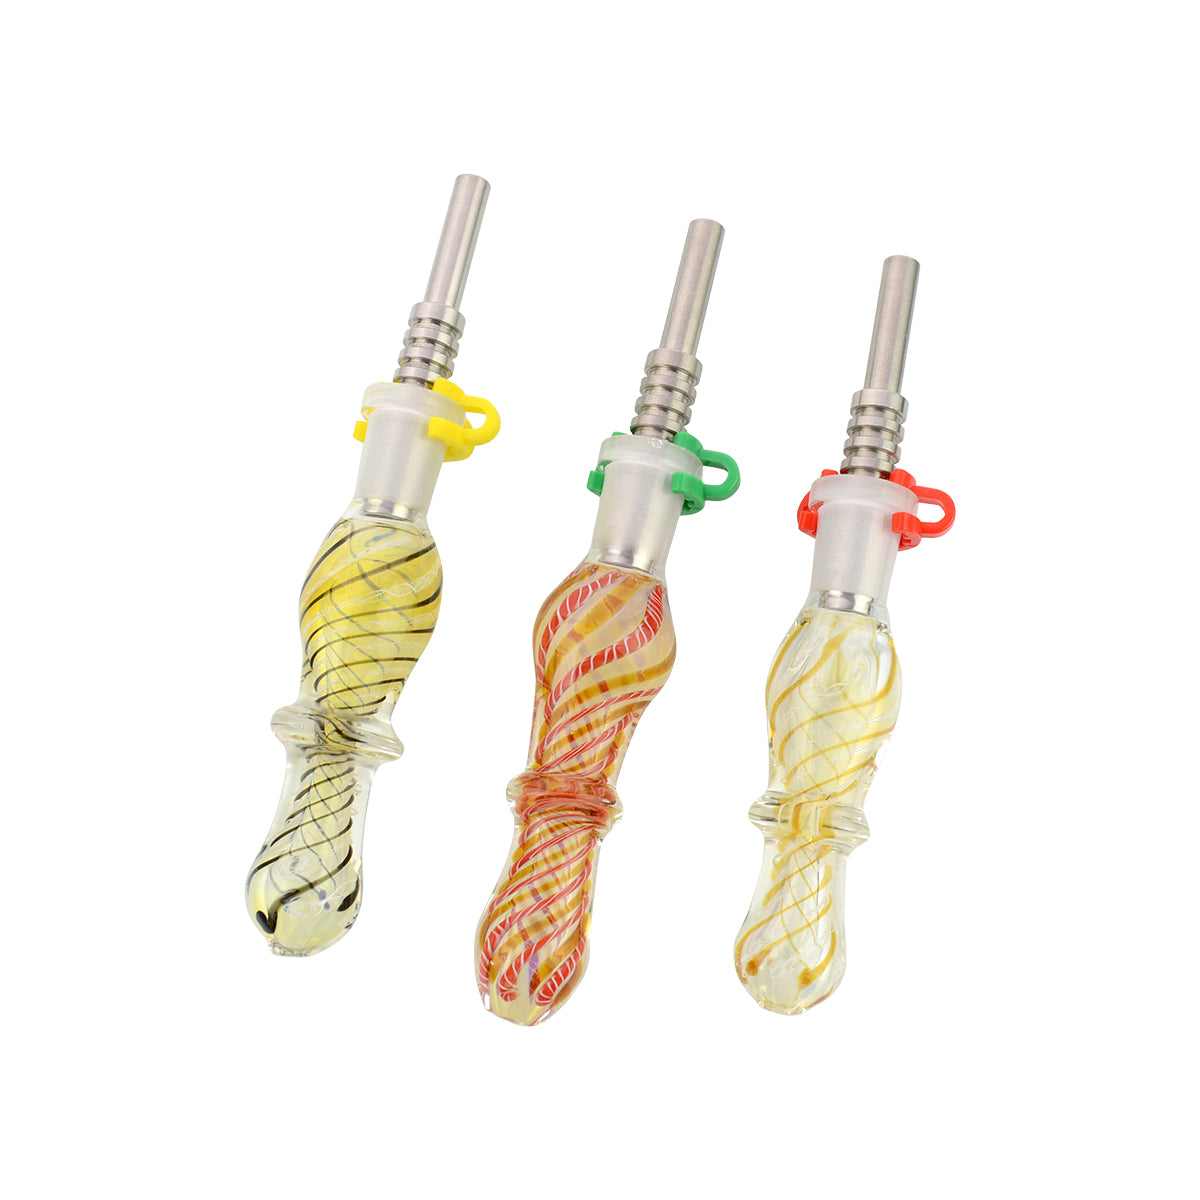 6'' Twisting Art Nectar Collector Concentrate Straw with 14mm Plastic Clip and Titanium NAIL